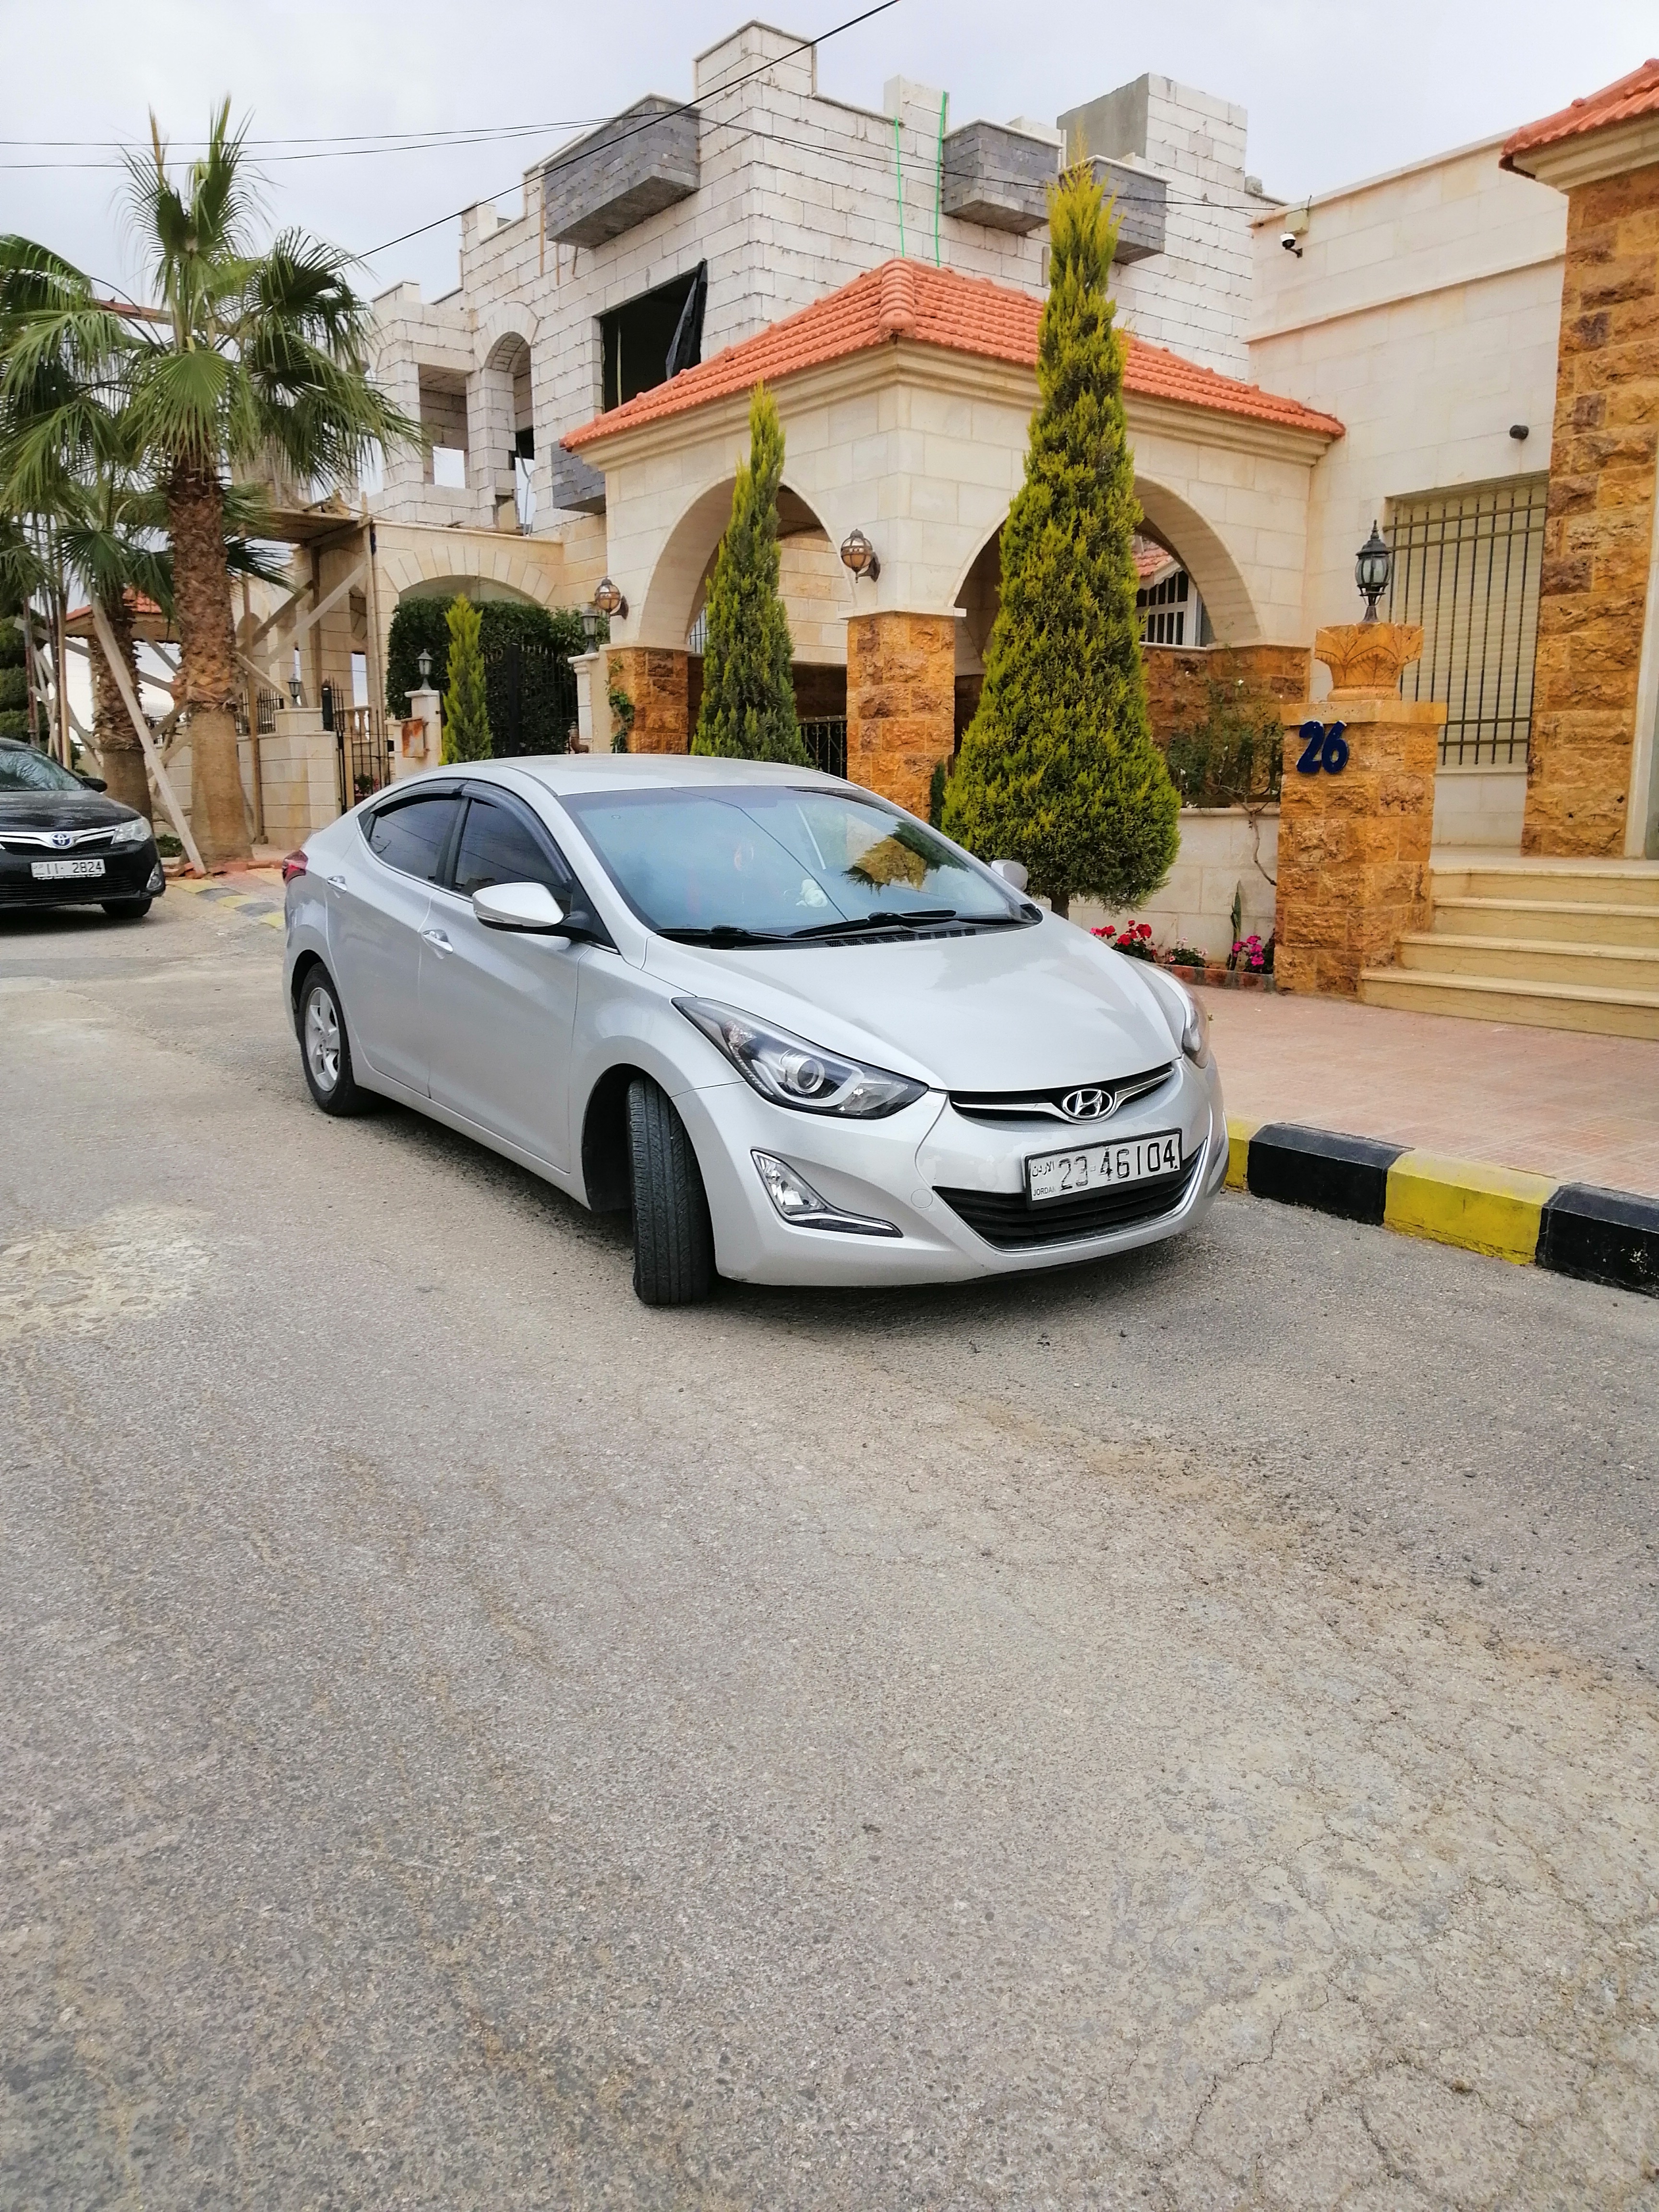 Capable car rental Dubai associations are a present for those people, who can't hold up under the expense of their own car or they are associated with that-  للإيجار هونداي افانتي...